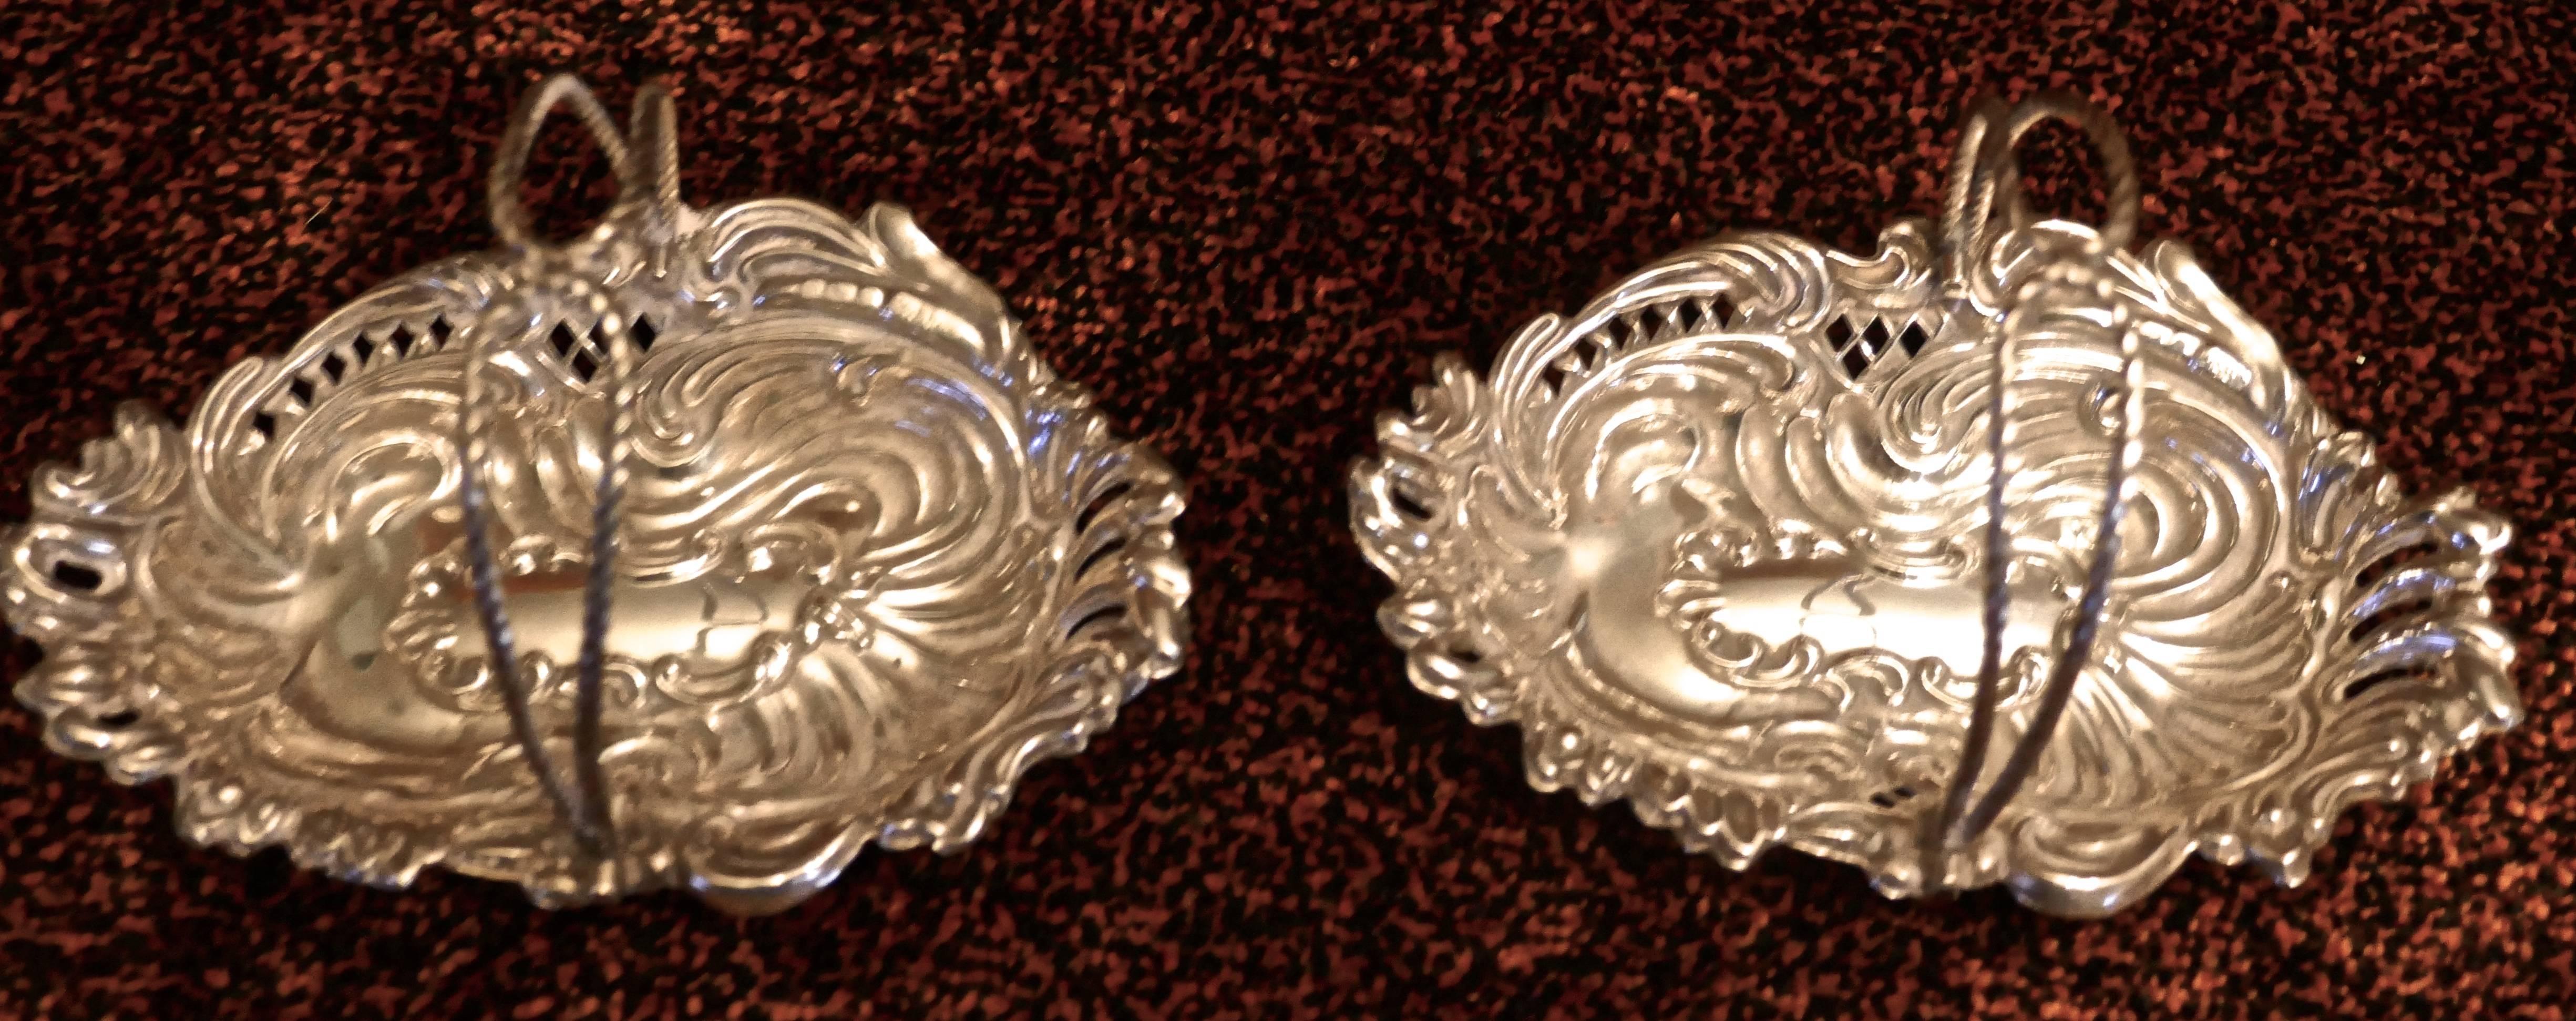 19th Century Pair of Victorian Bon Bon Baskets by Marks and Cohen, 1899 For Sale